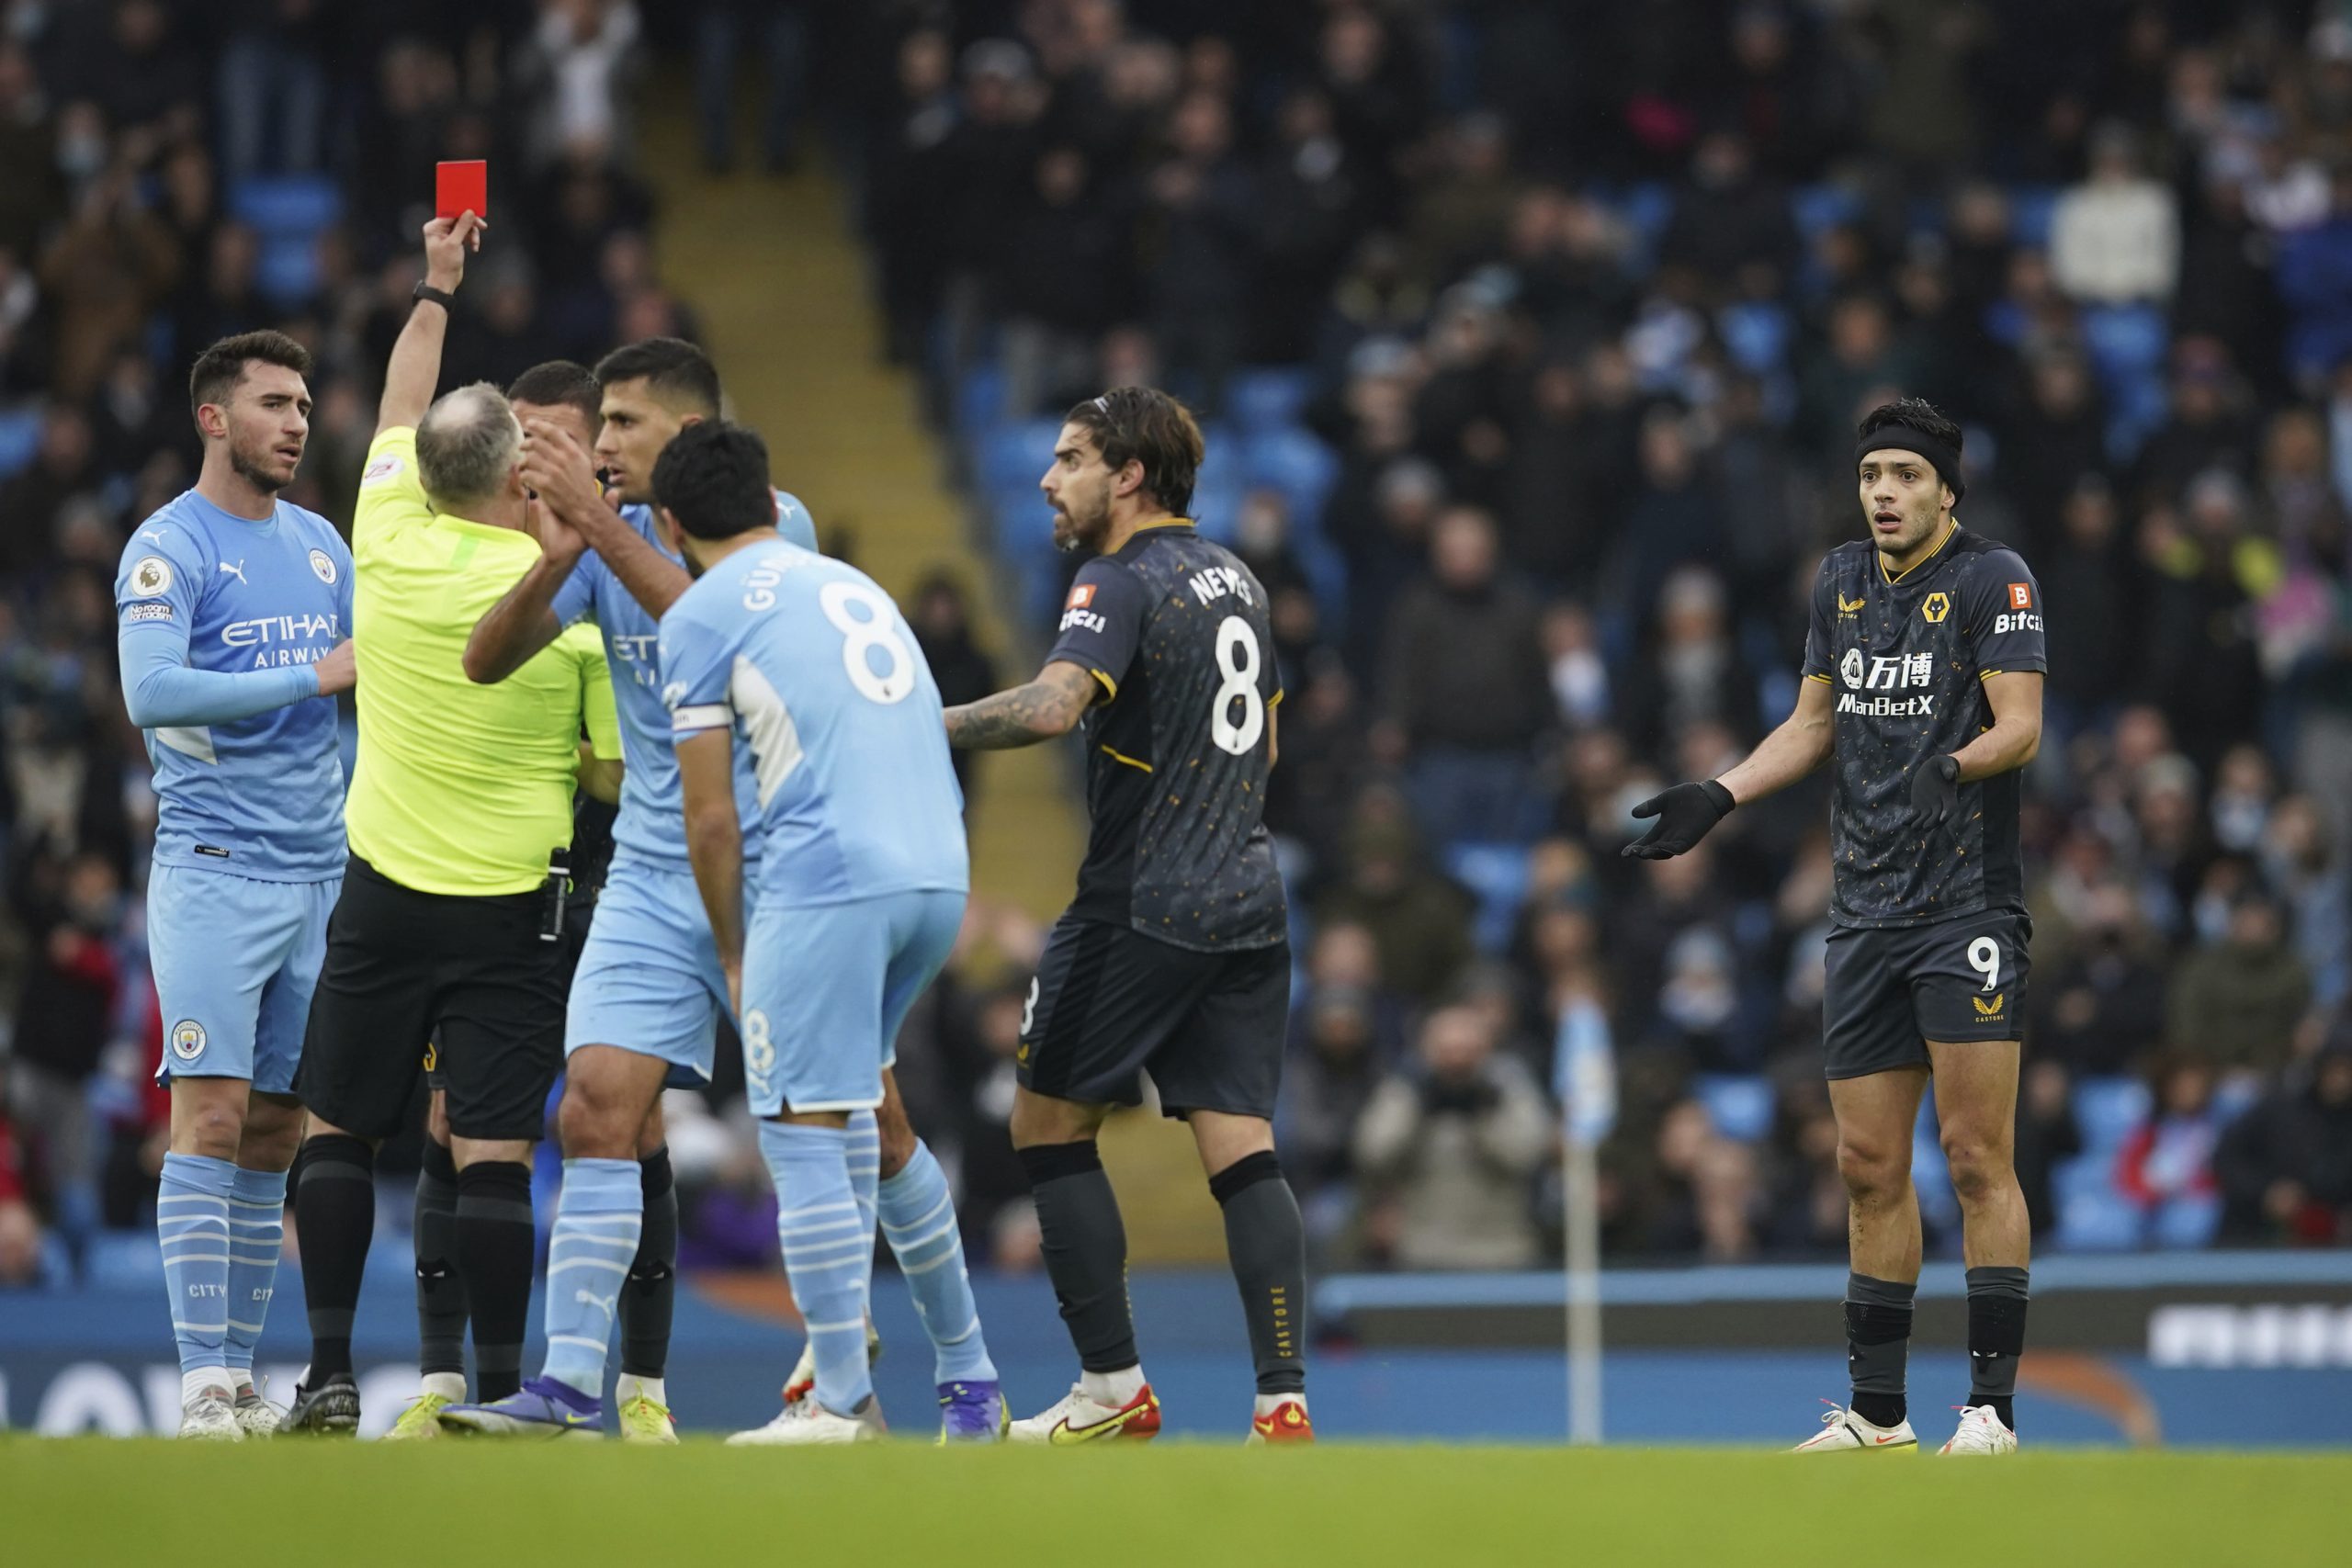 Wolverhampton Wanderers' Raul Jimenez, right, receives a red card from referee Jonathan Moss during the English Premier League soccer match between Manchester City and Wolverhampton Wanderers, at the Etihad stadium in Manchester, England, Saturday, Dec.11, 2021. (AP Photo/Dave Thompson)